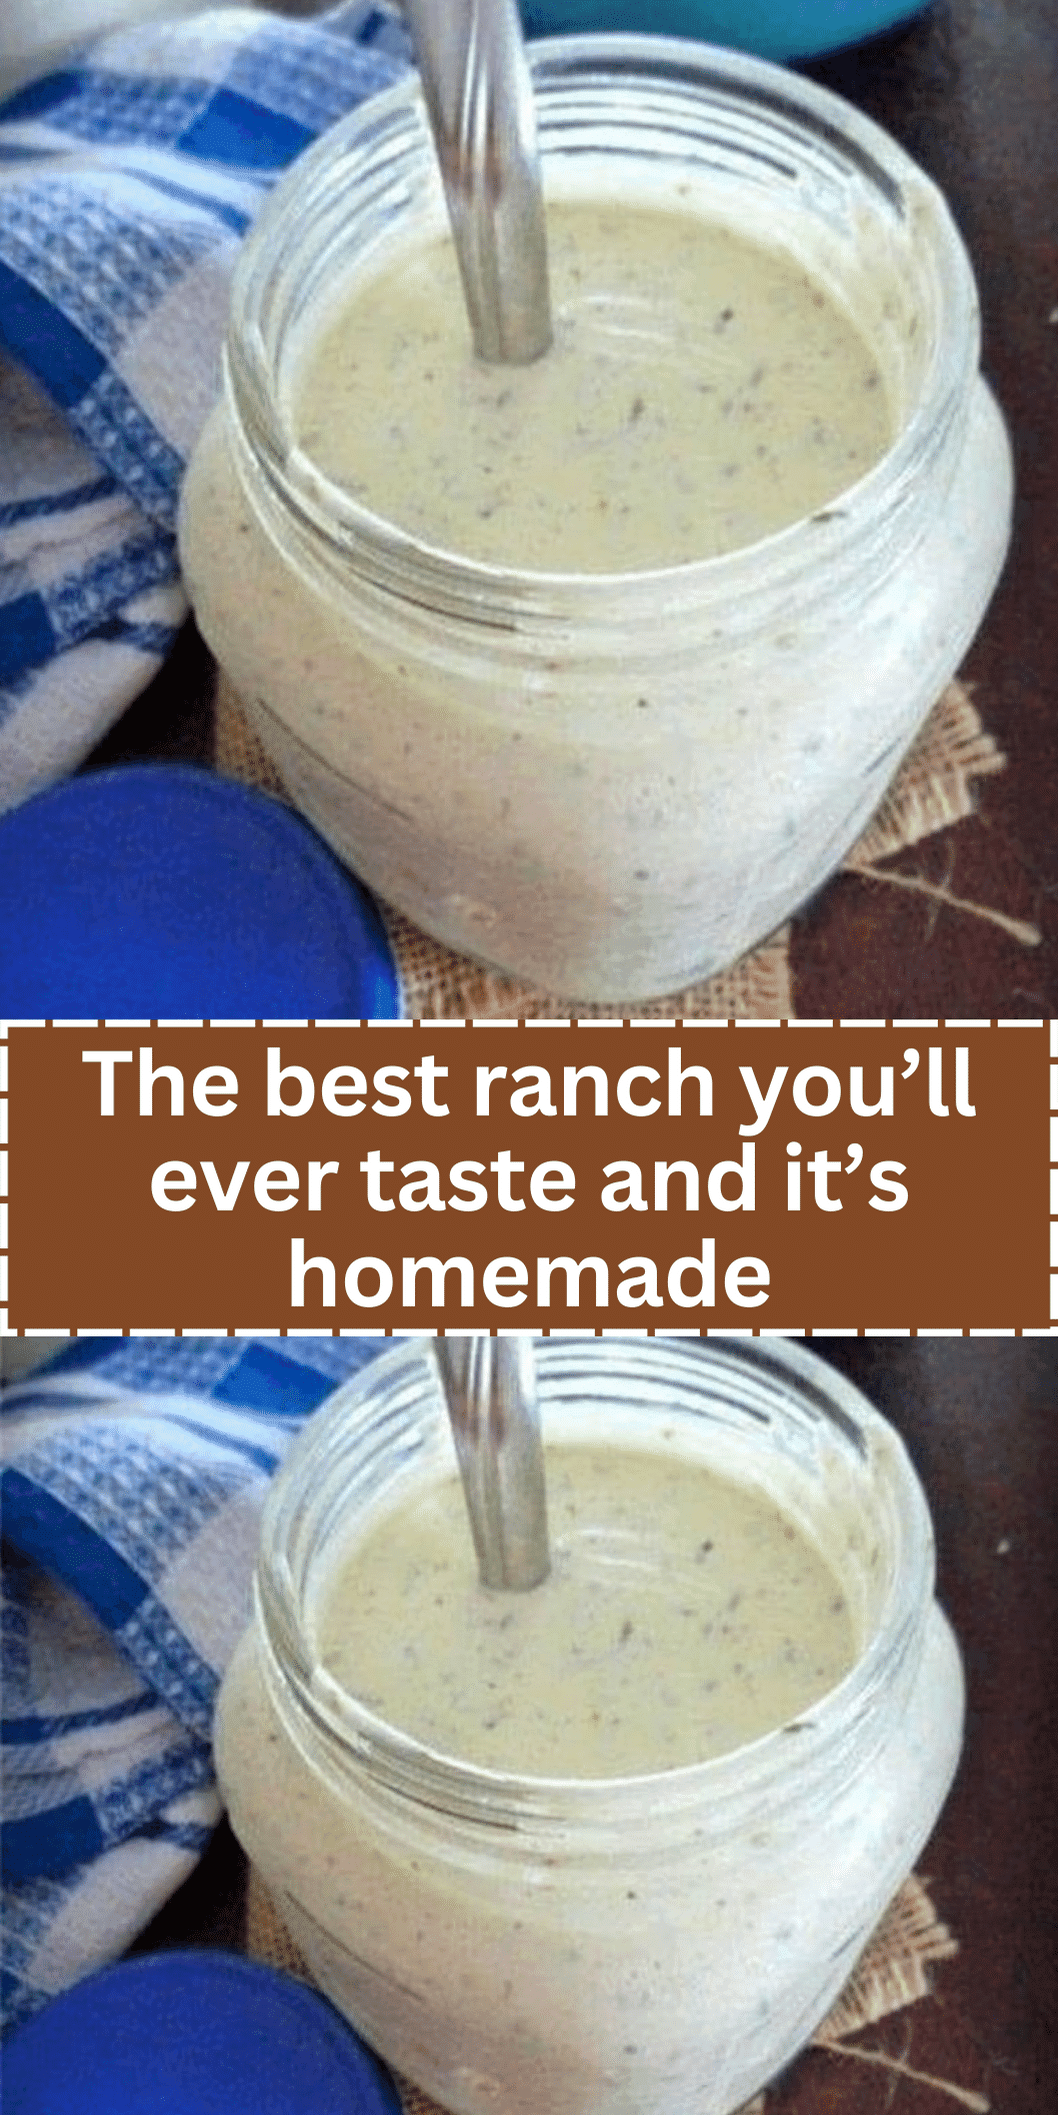 The best ranch you’ll ever taste and it’s homemade